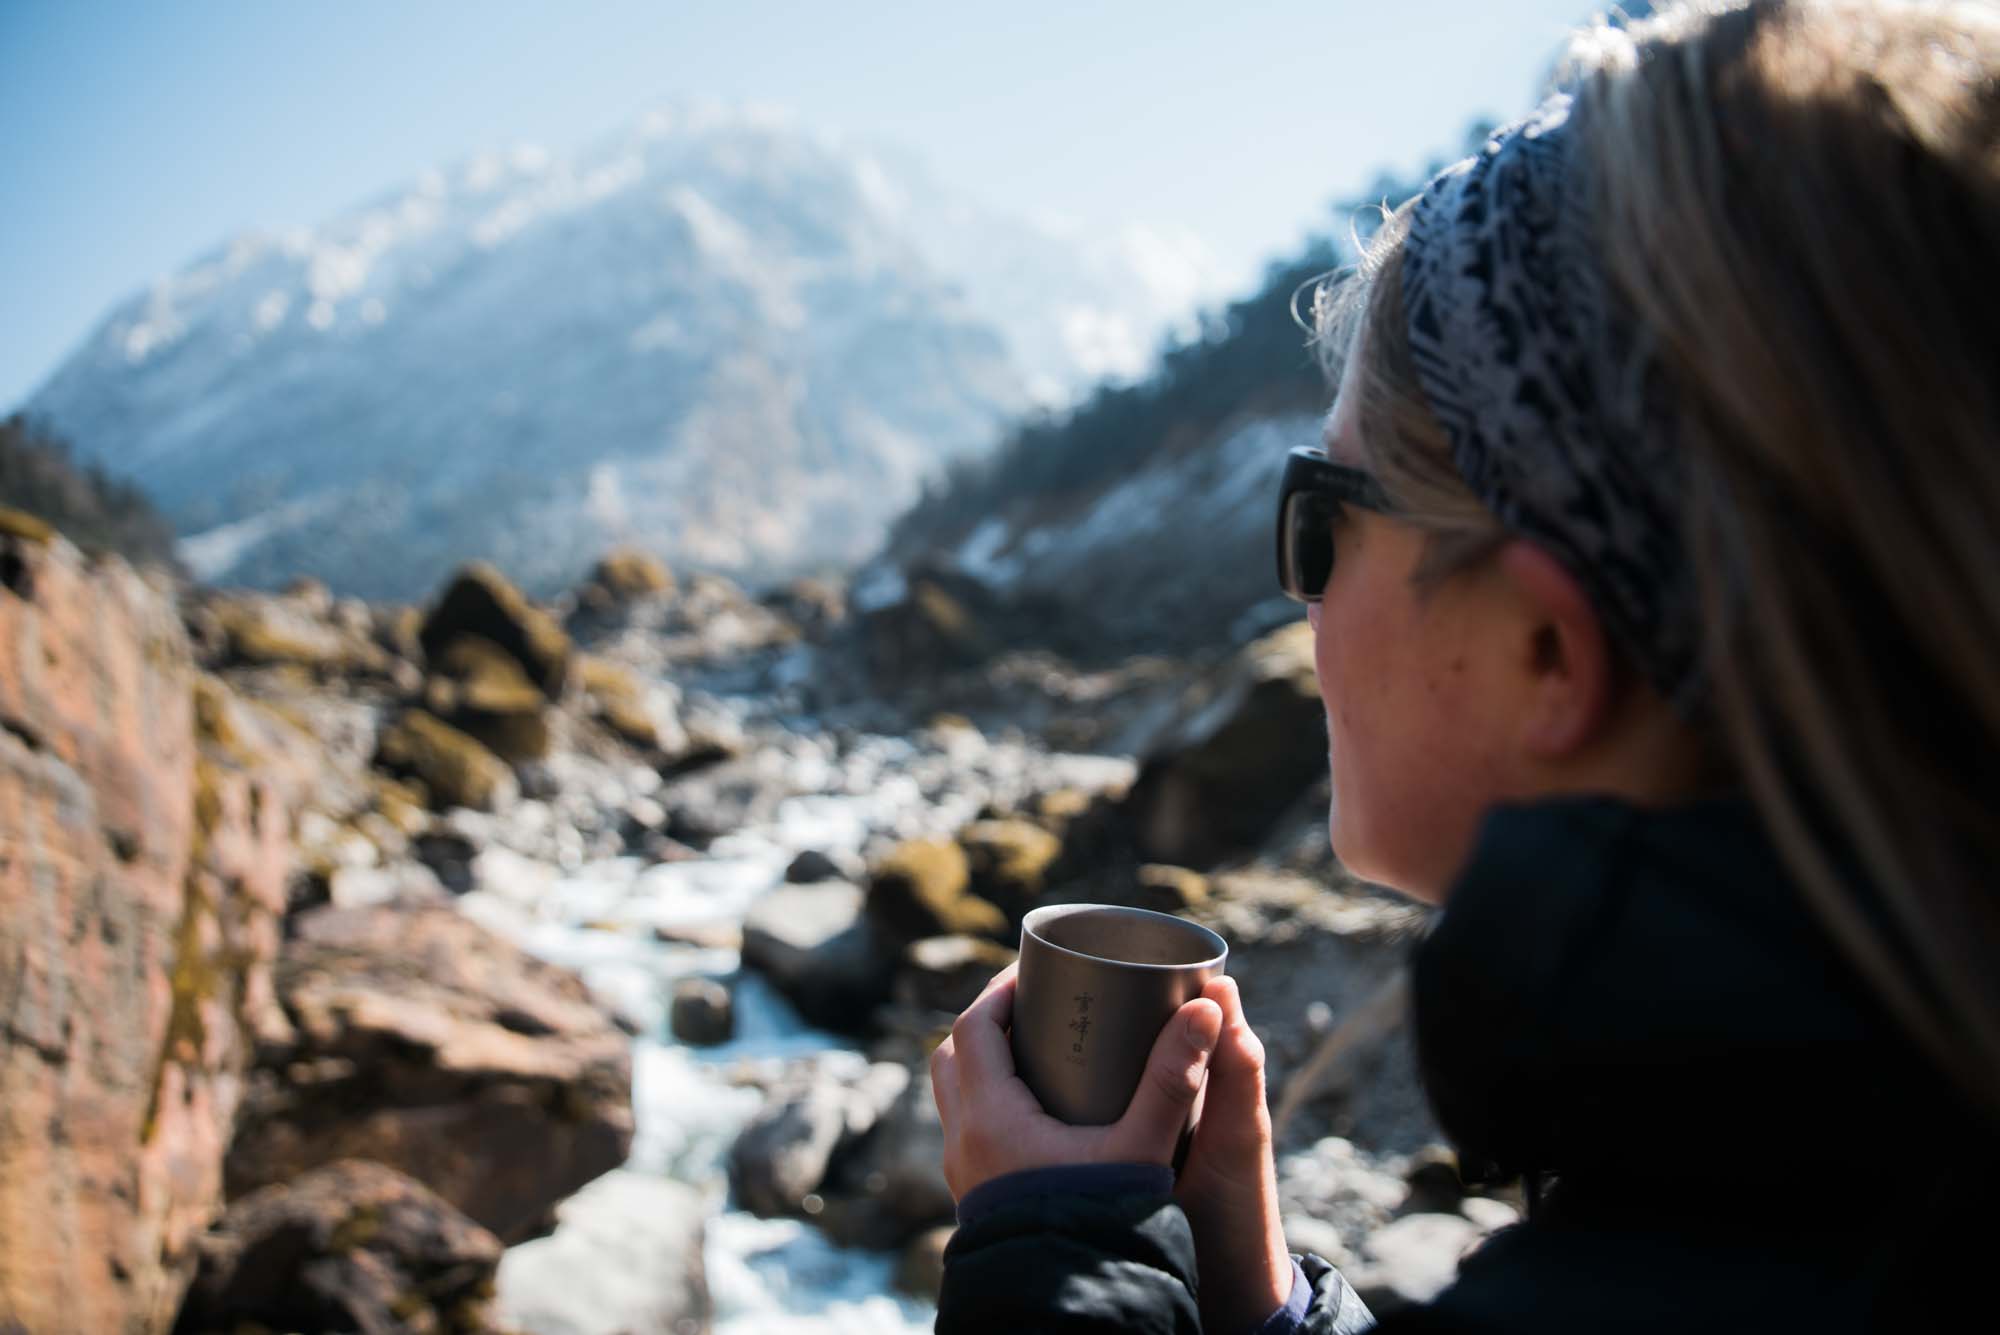 Charlotte Austin in Nepal. Photo by Bryan Aulick.